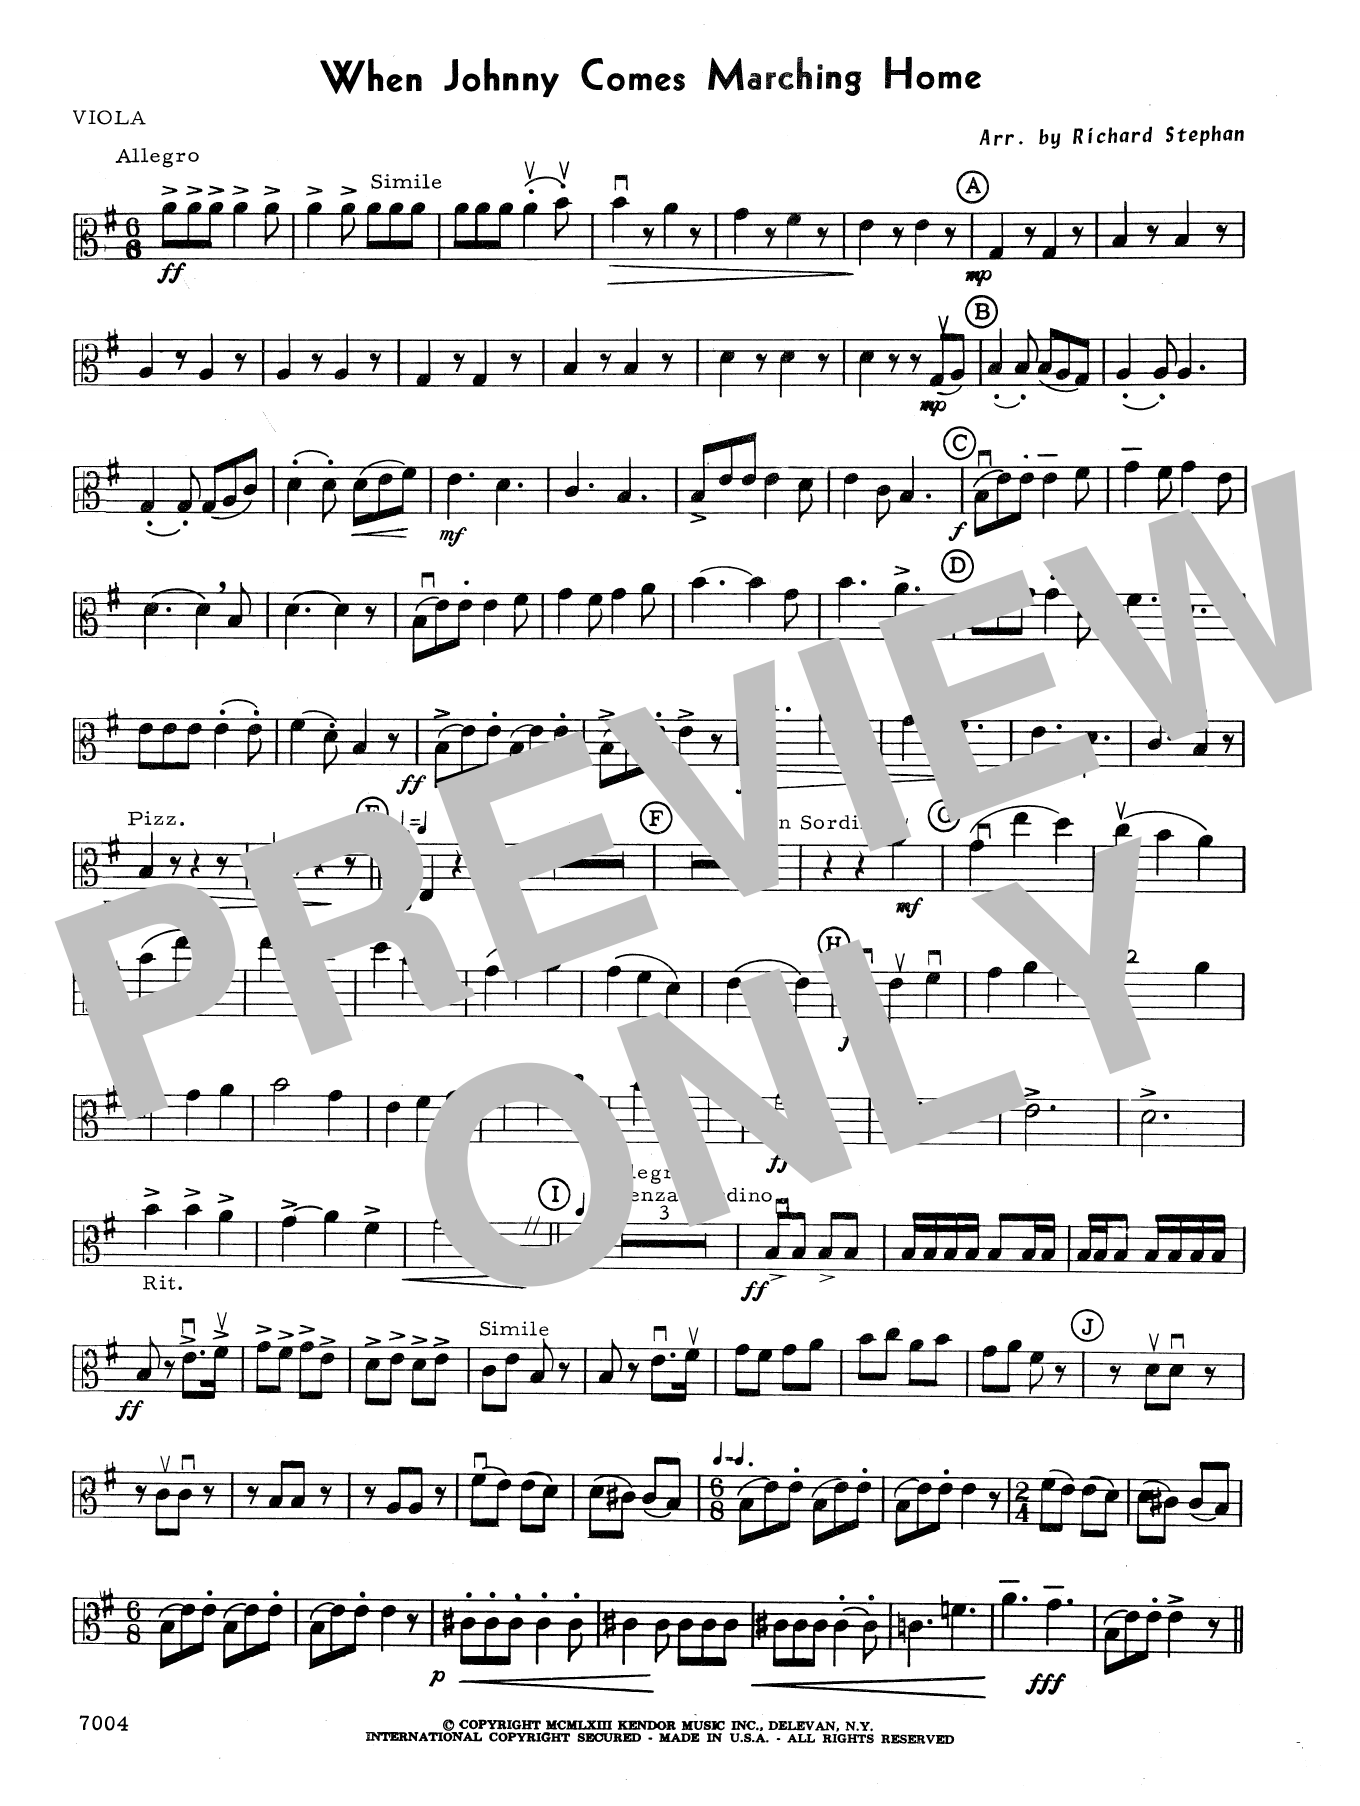 Download Richard Stephan When Johnny Comes Marching Home - Viola Sheet Music